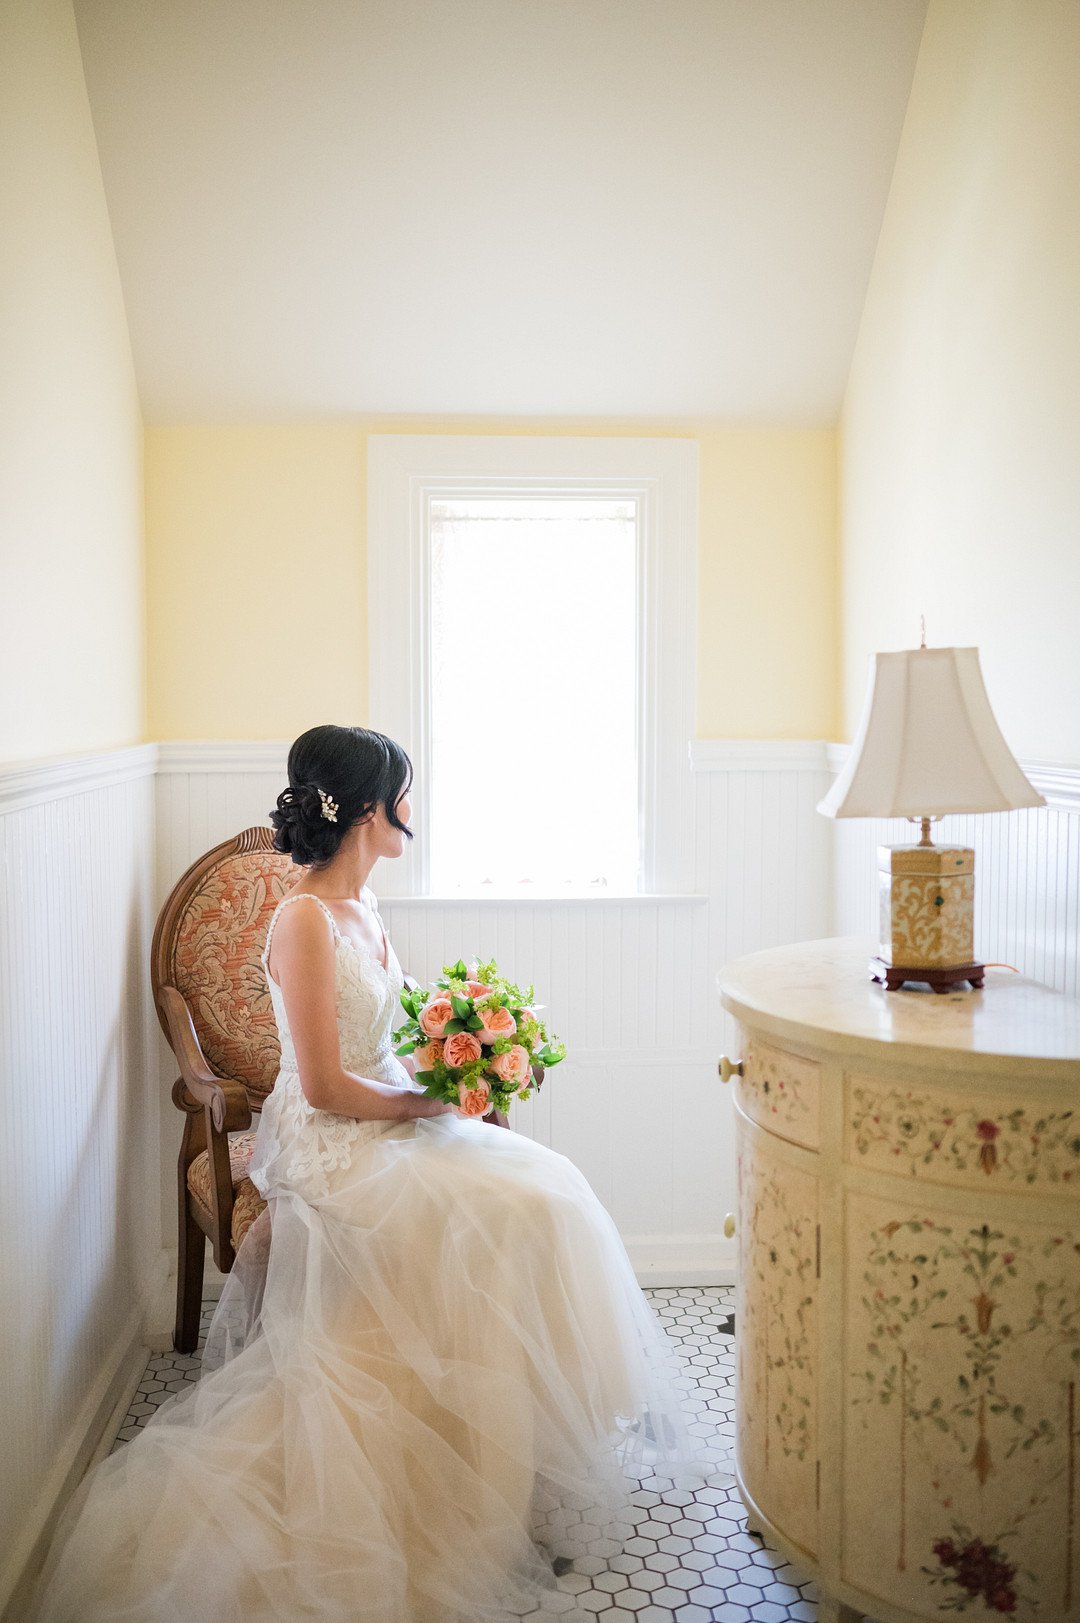 Chan_Chan_Winterlyn Photography_GLESSNER HOUSE CHICAGO WEDDING-23_low.jpg